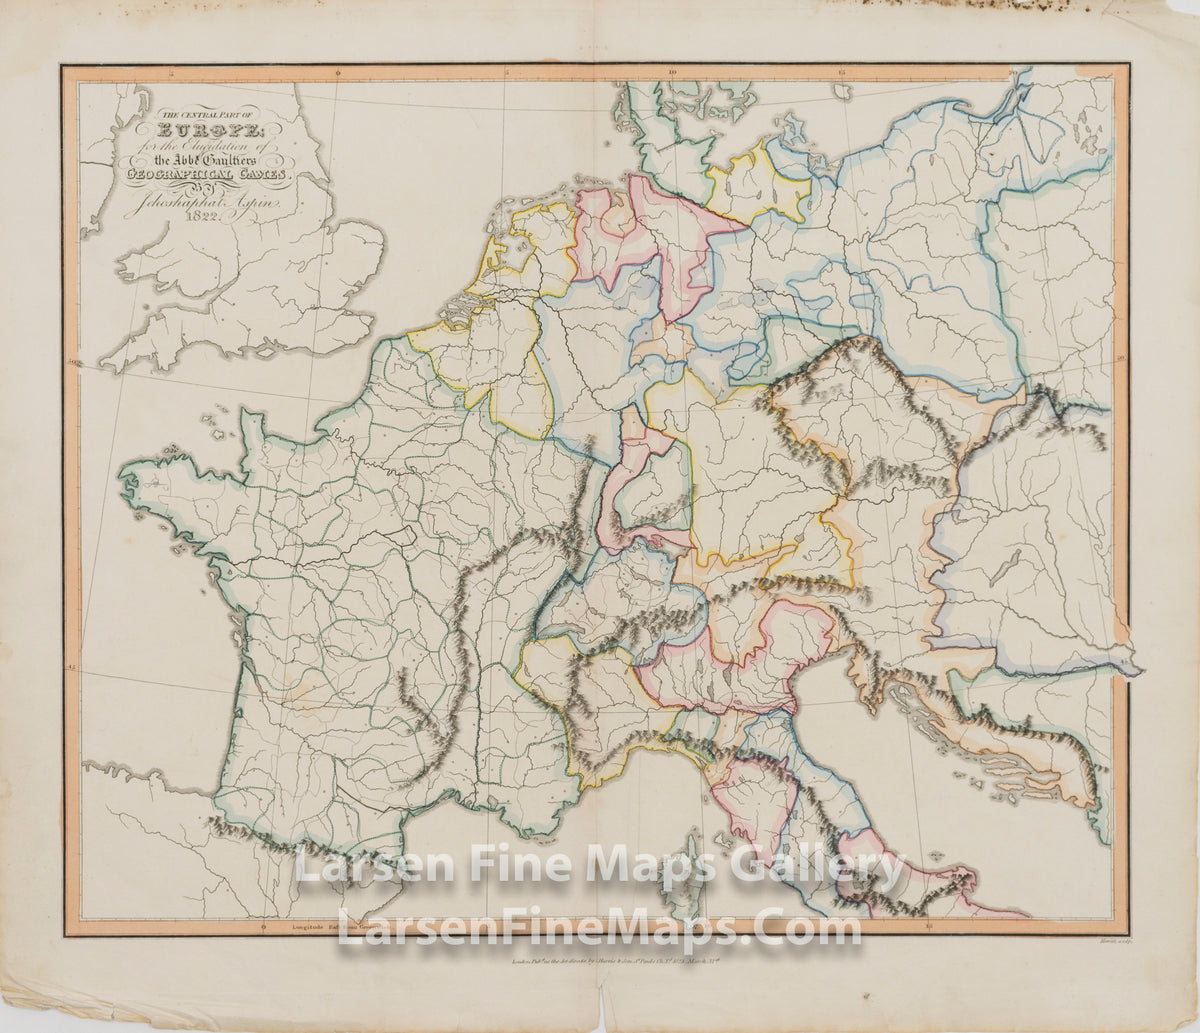 Europe for the Elucidation of the Abbe Gaultier's Geographical Games